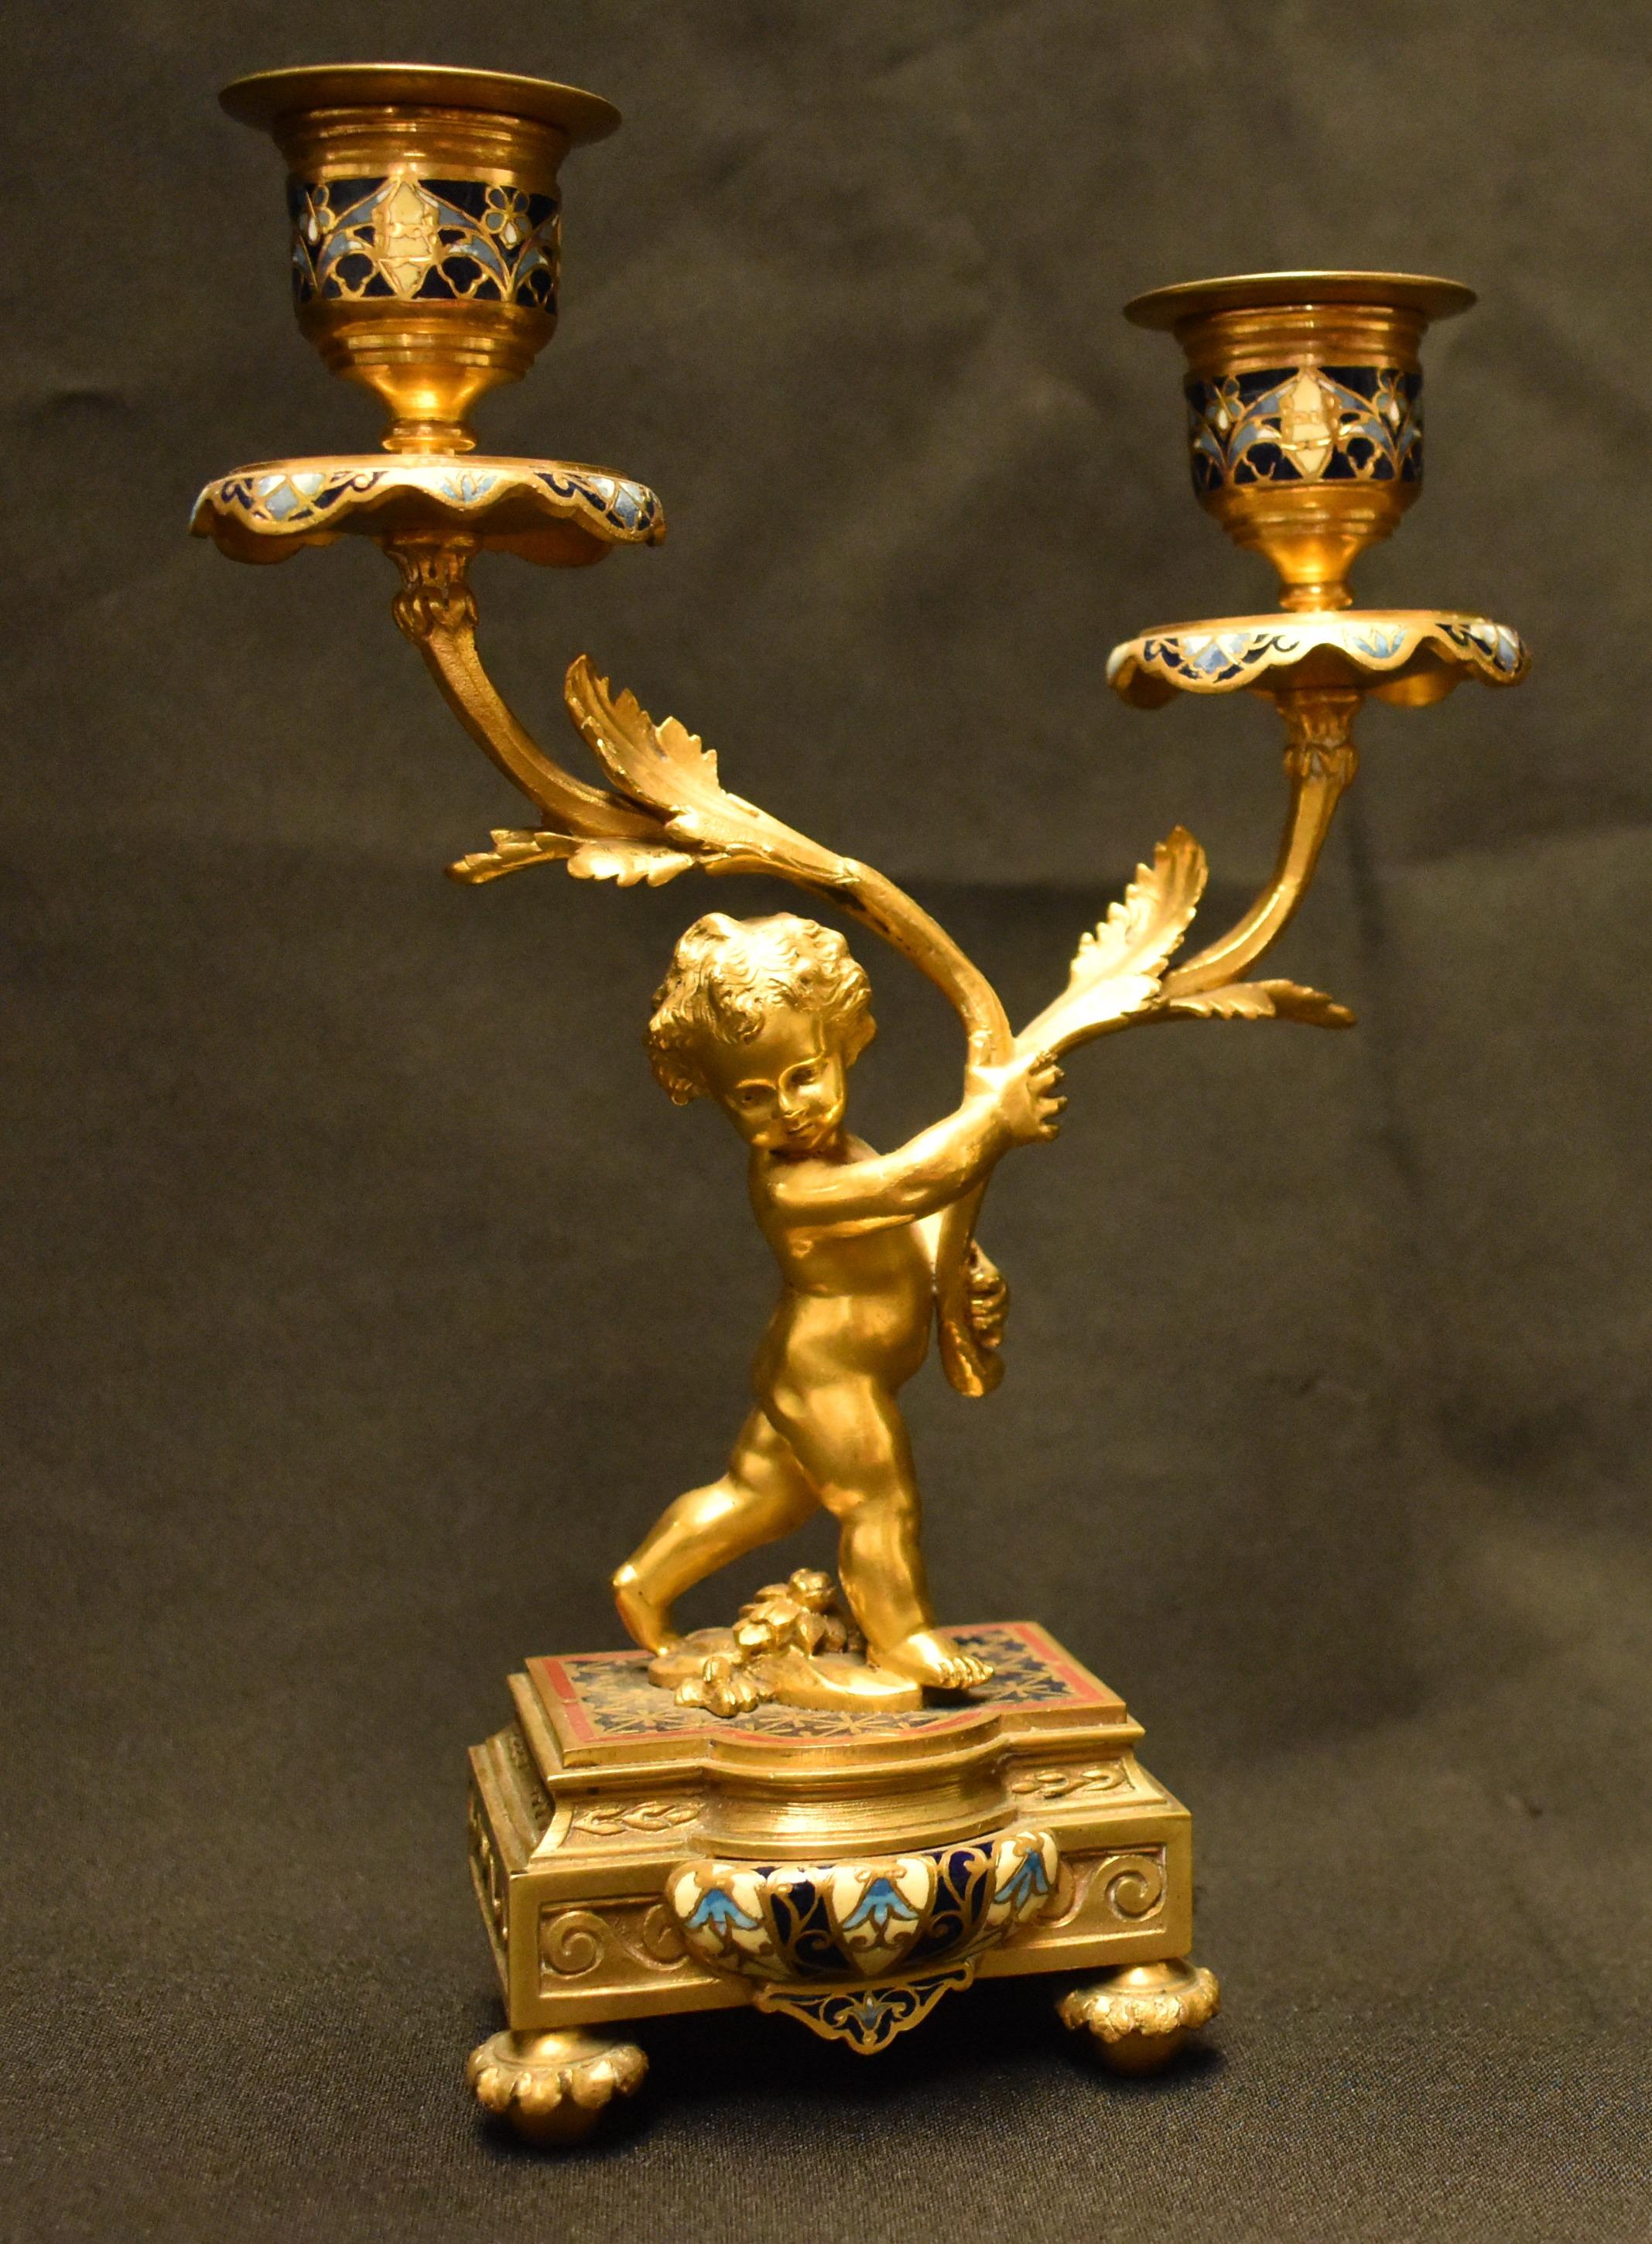 Champlevé Pair of French Ormolu and Cloisonné Candlesticks, 19th Century